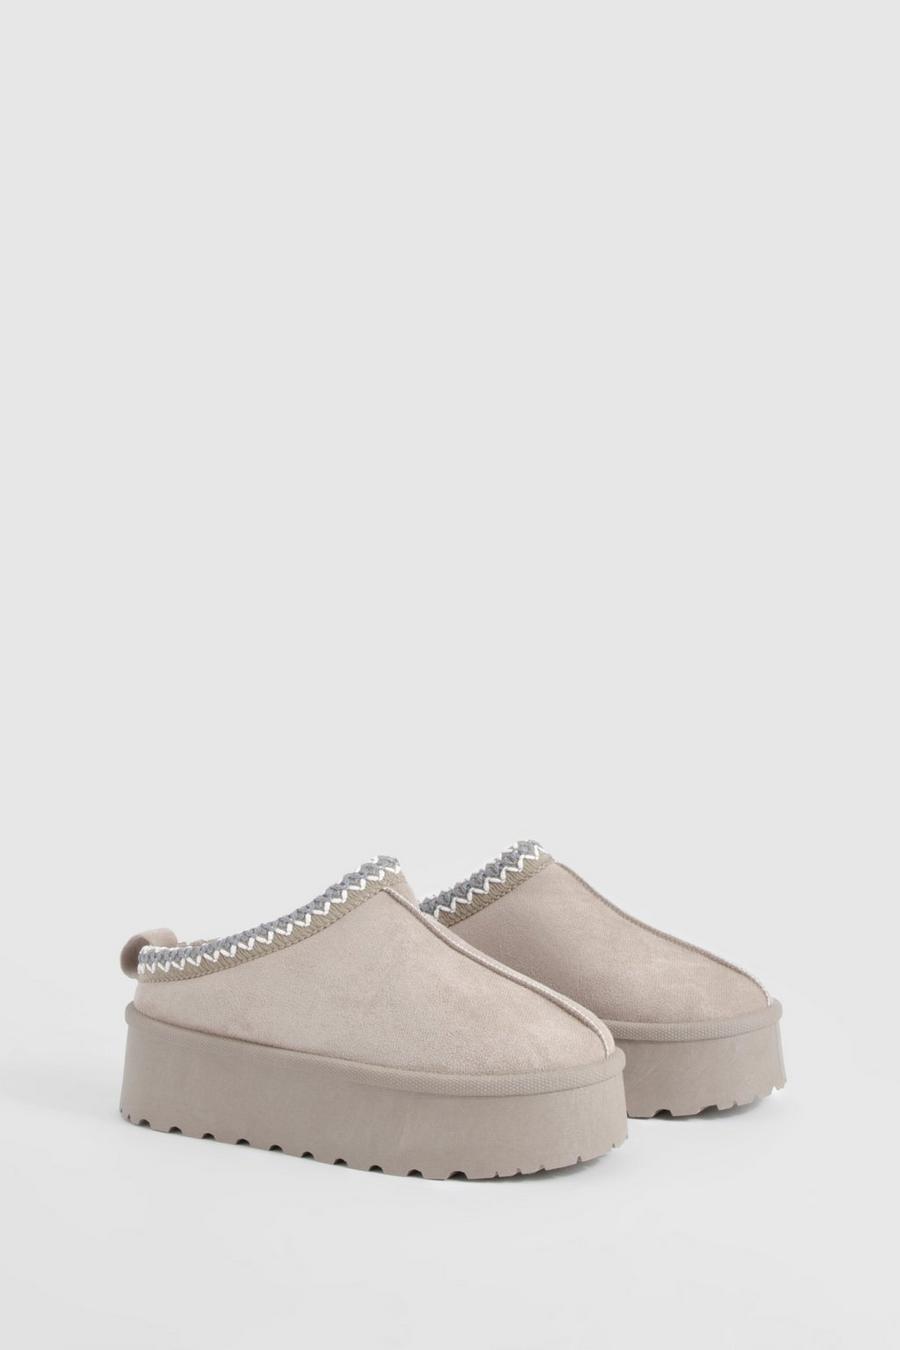 Taupe Embroidered Detailing Platform Slip On Cozy Mules